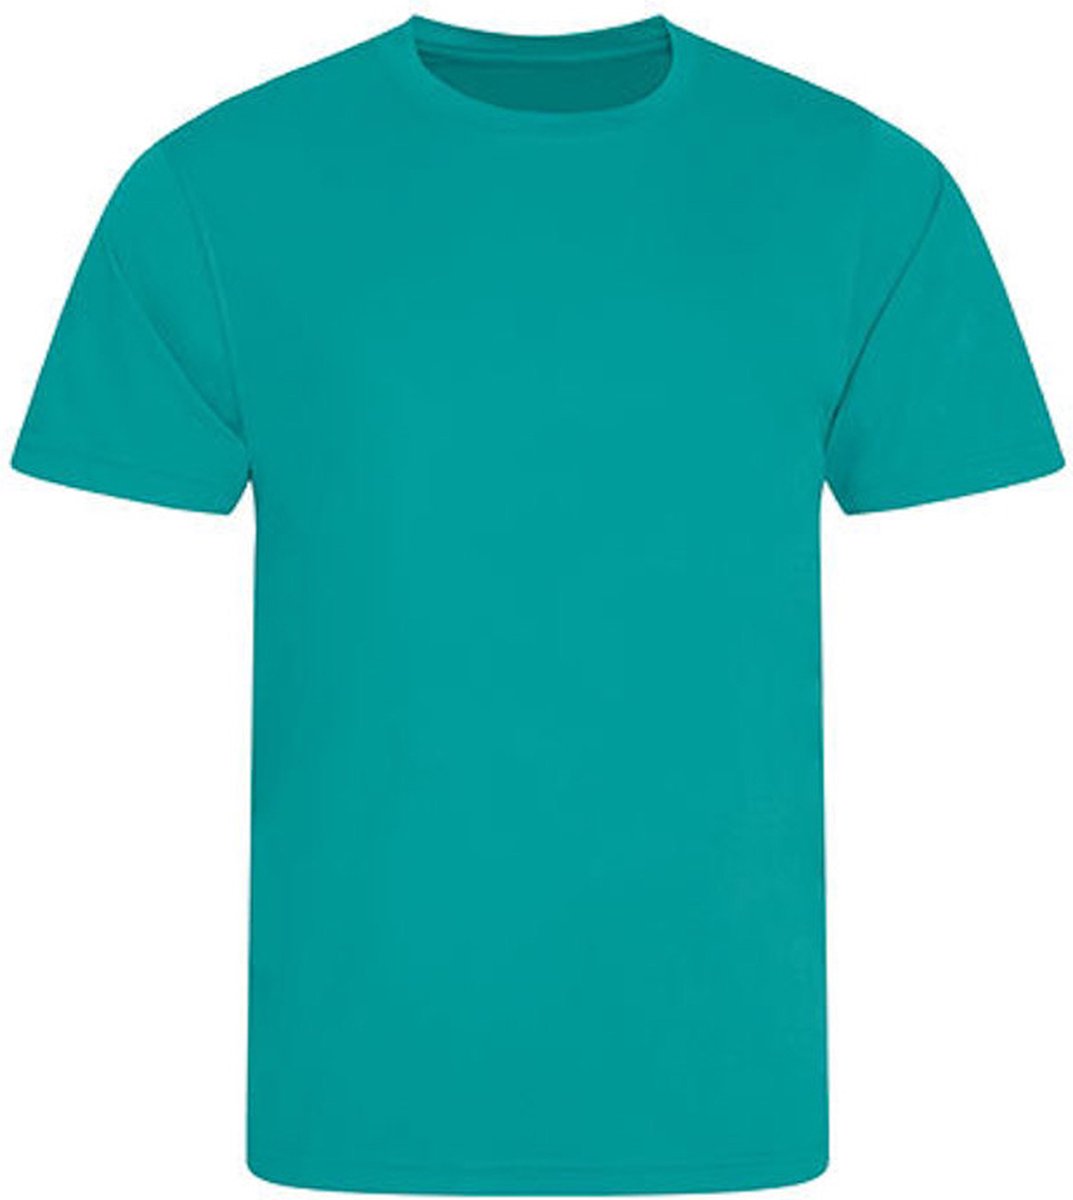 Herensportshirt 'Cool Smooth' Turquoise - XXL